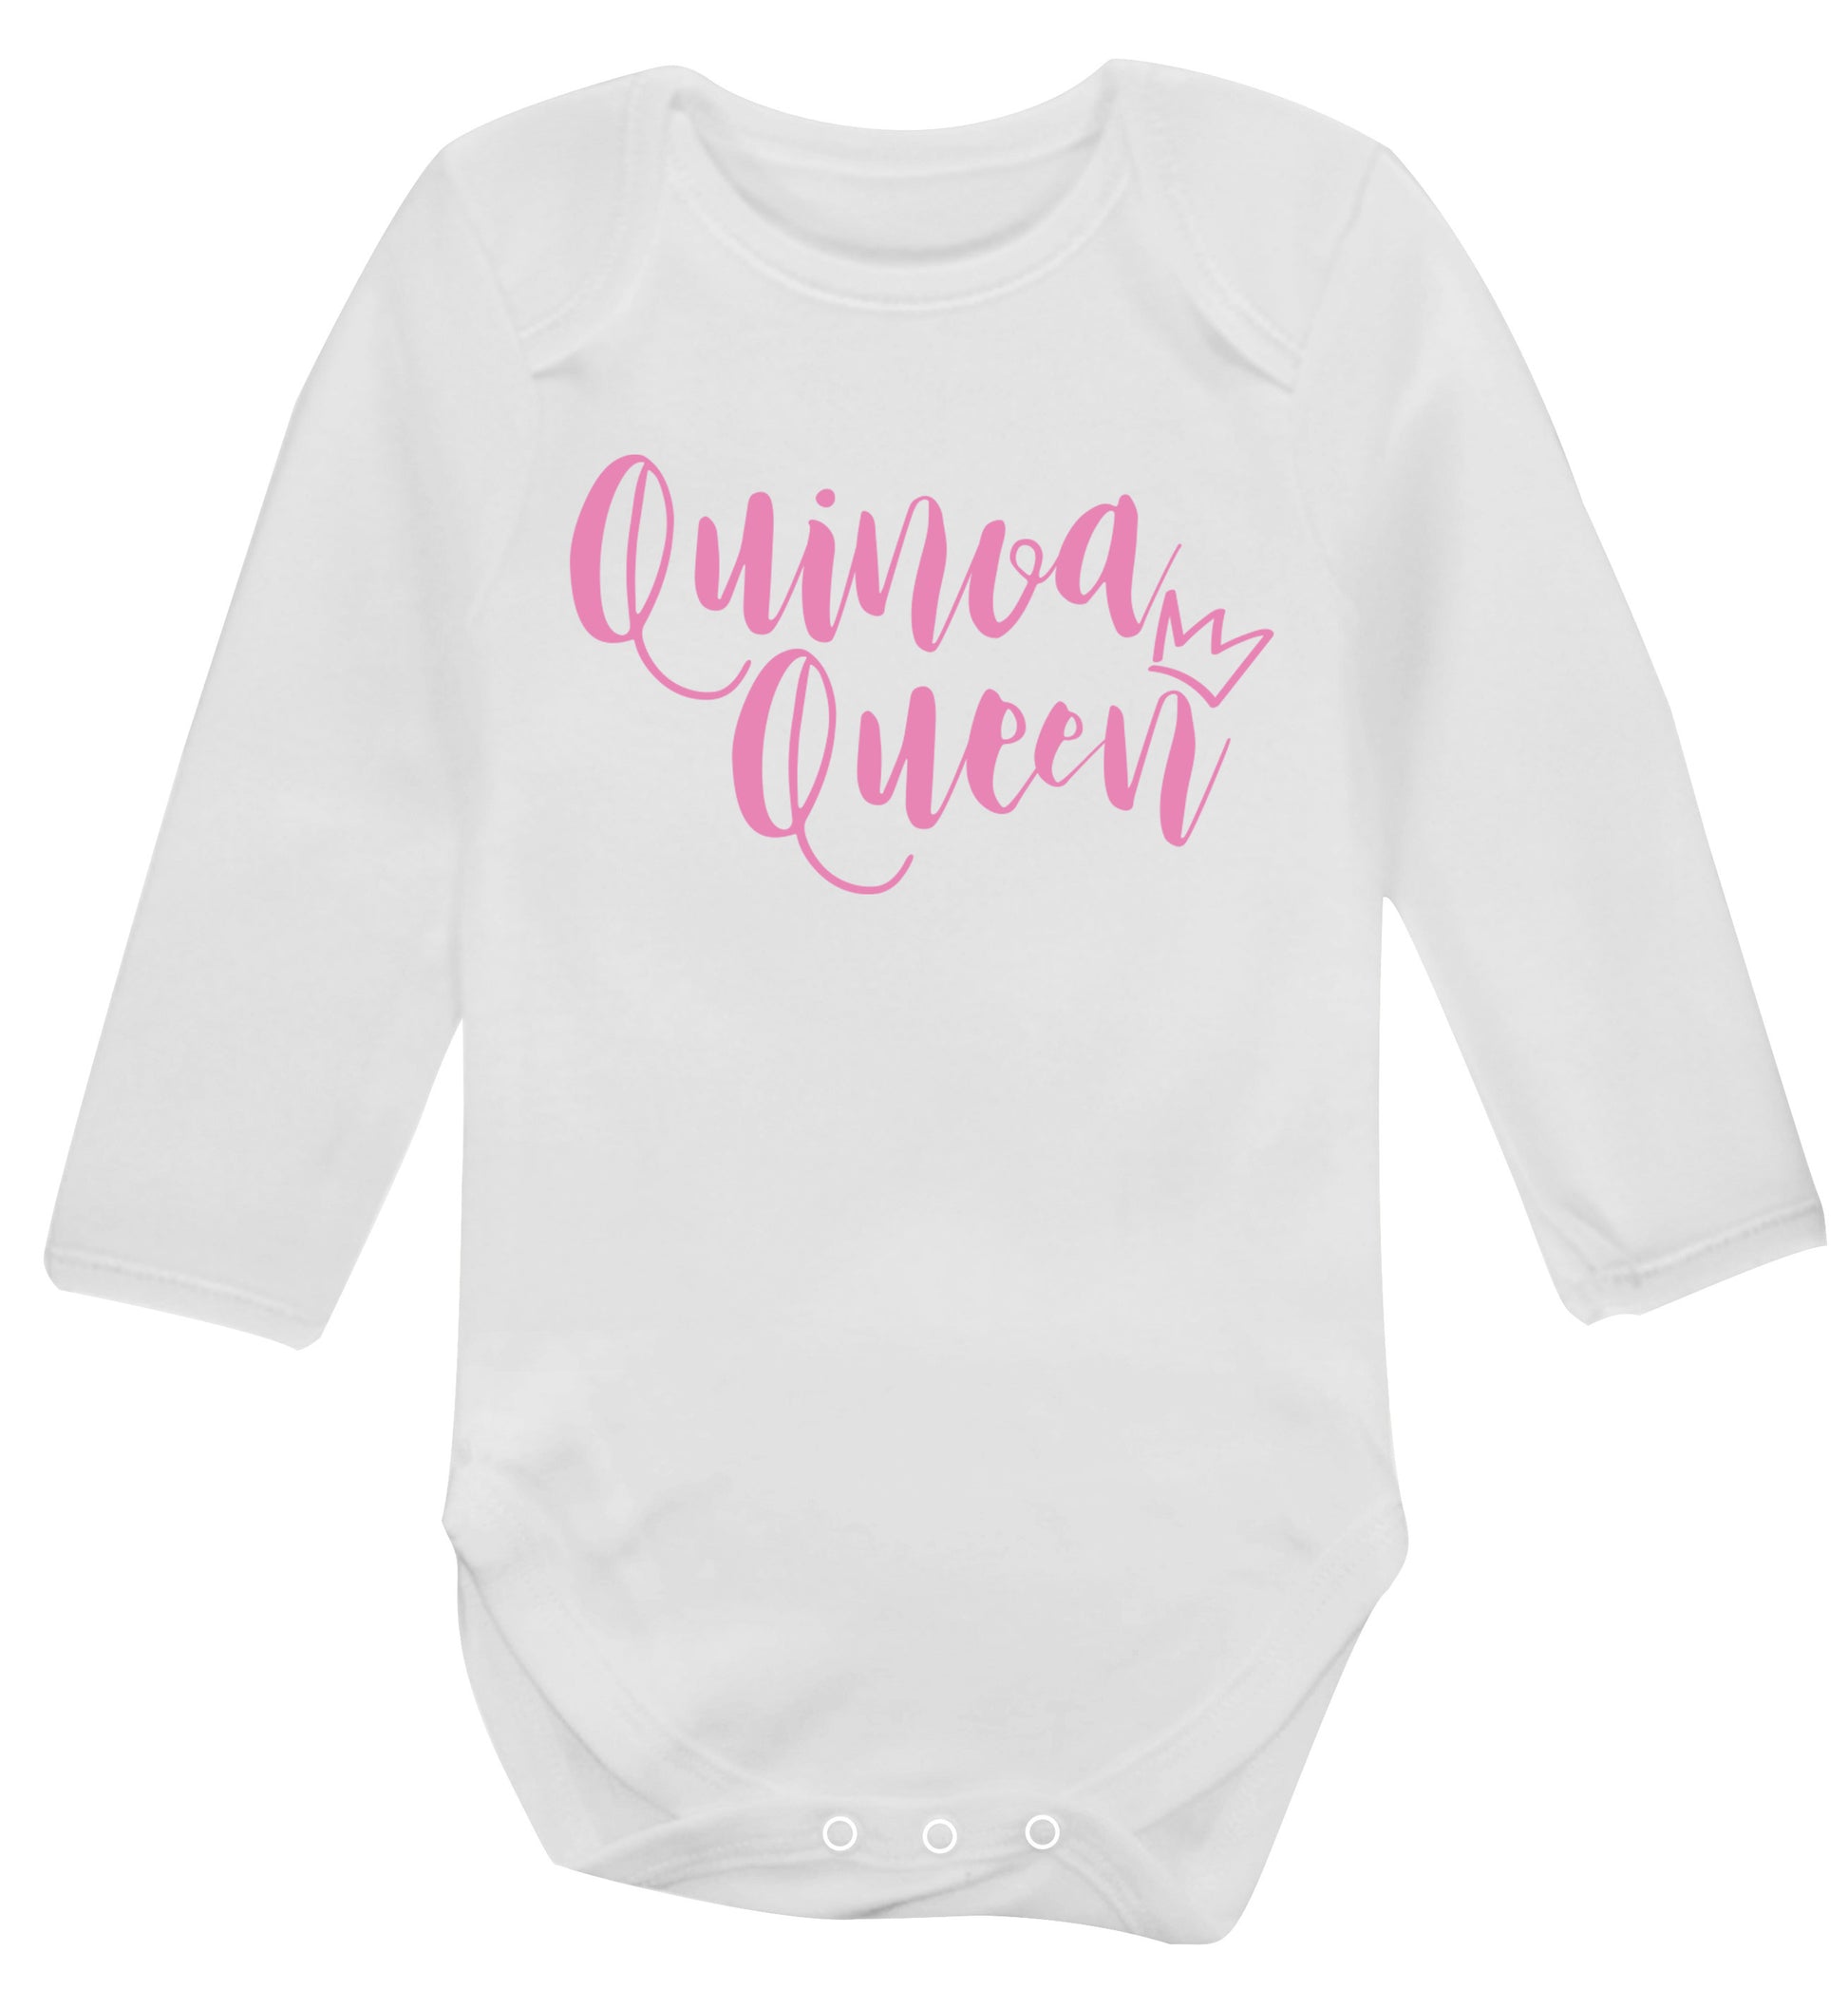 Quinoa Queen Baby Vest long sleeved white 6-12 months